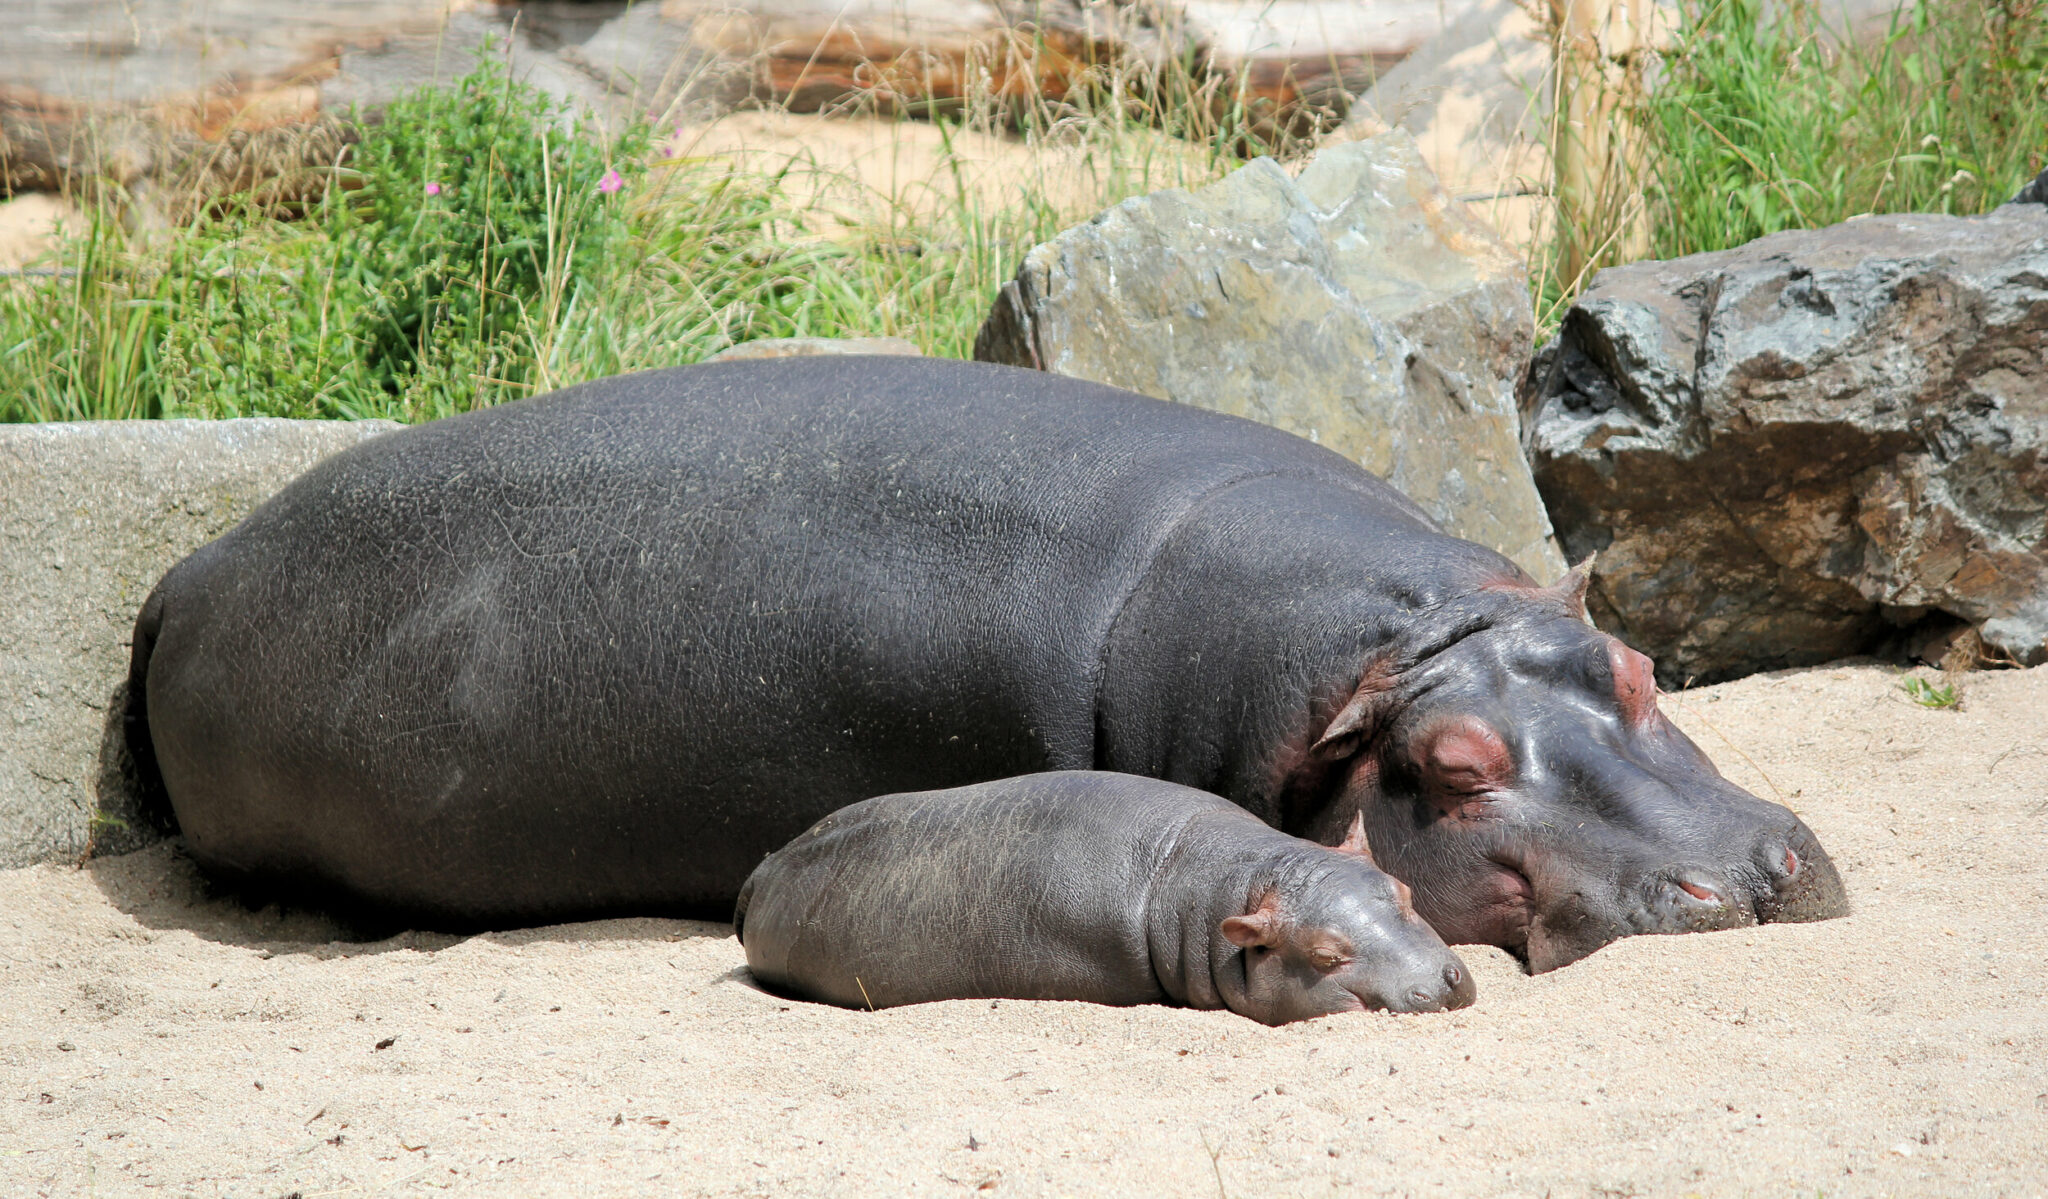 how did the hippopotamus get its name and what does it mean in greek